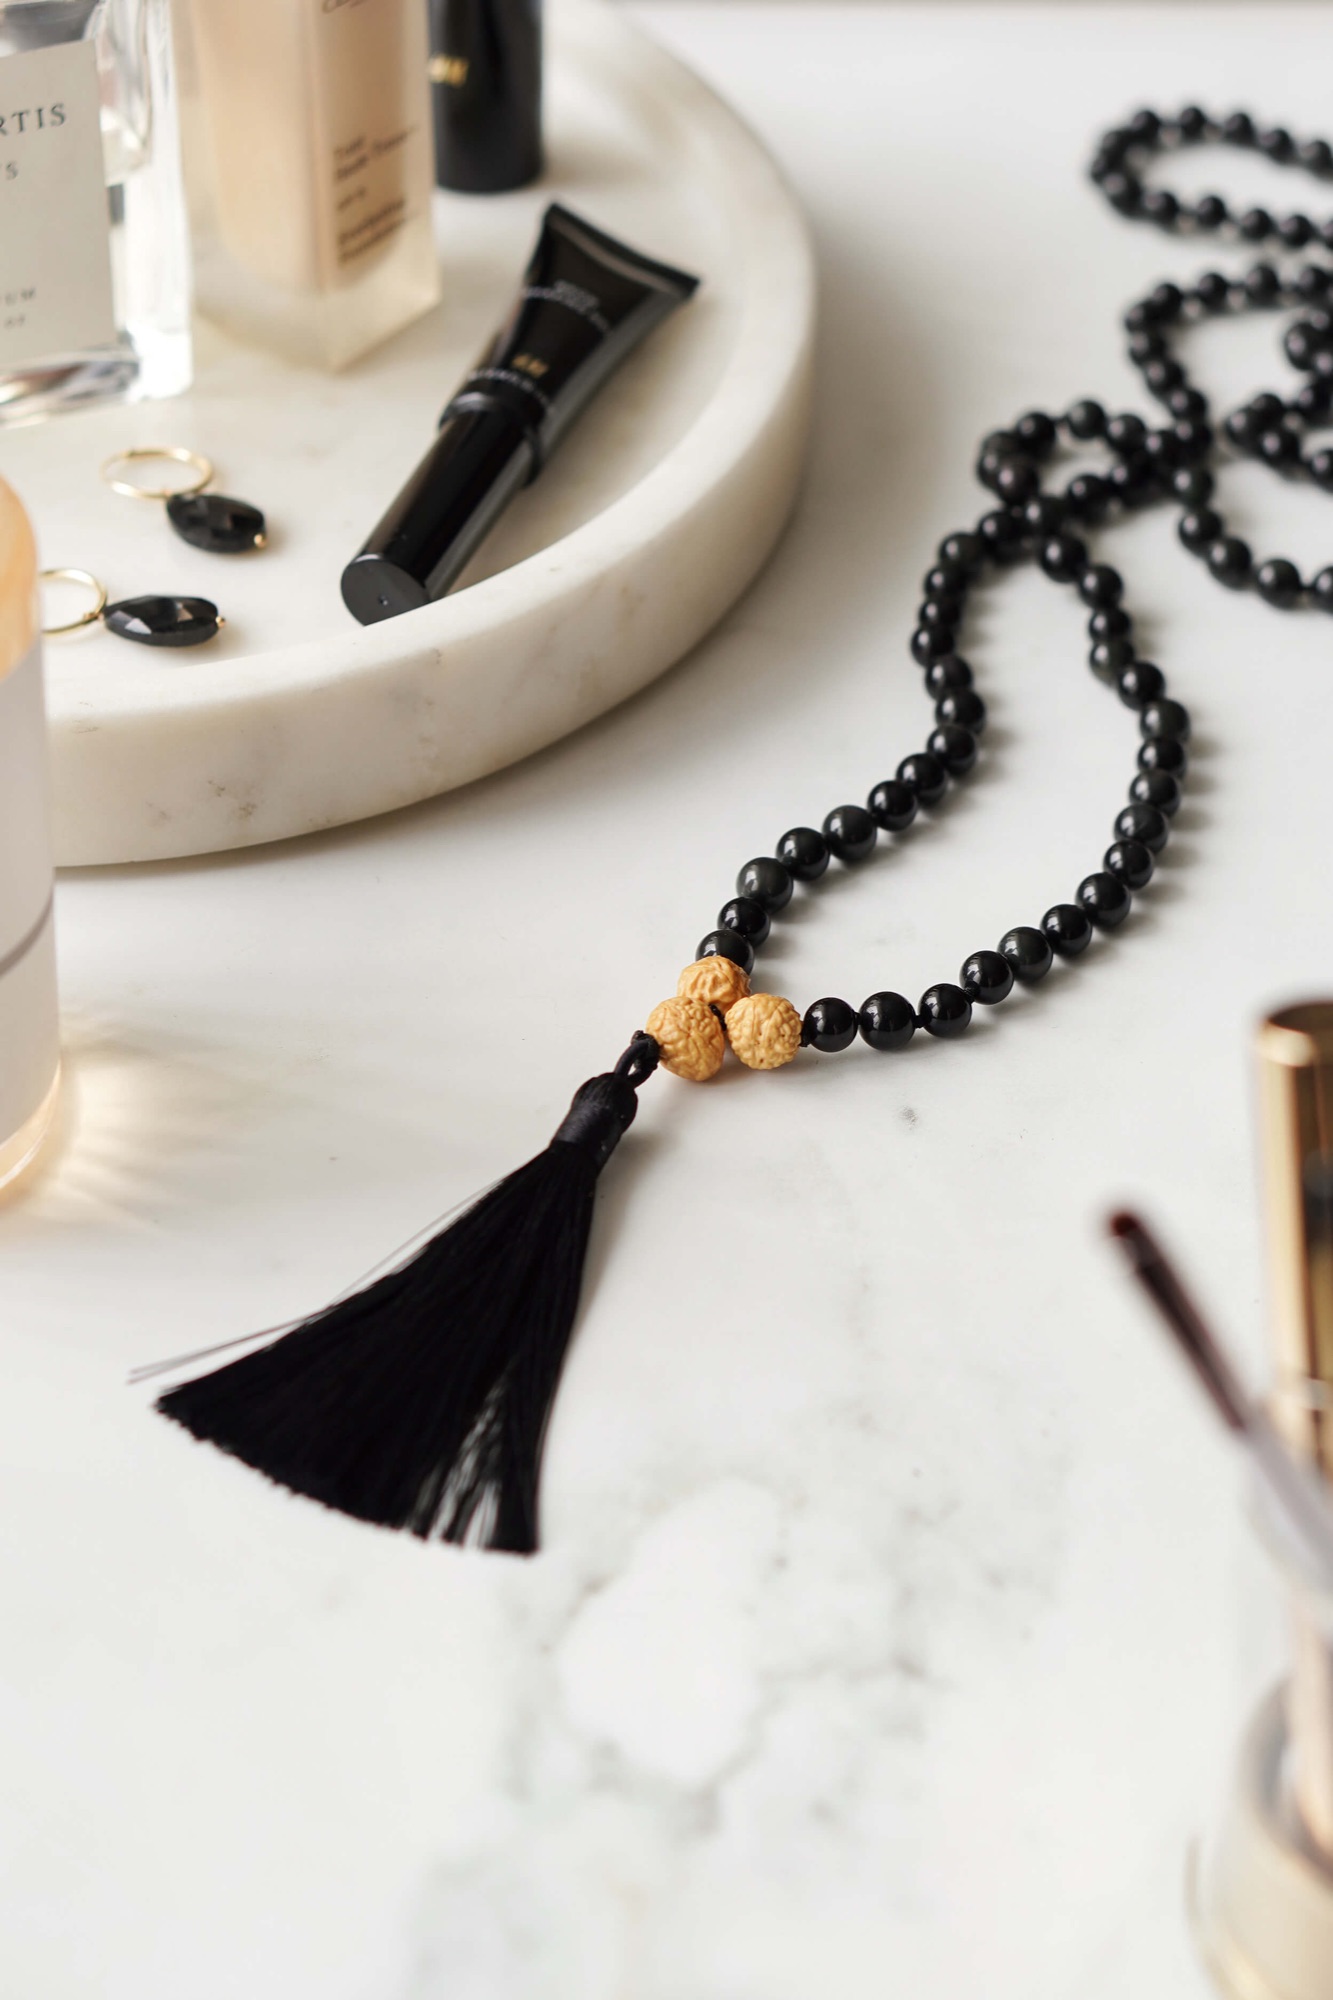 The 108 black obsidian Mala bead necklace - a beautiful crystal necklace with so much meaning!